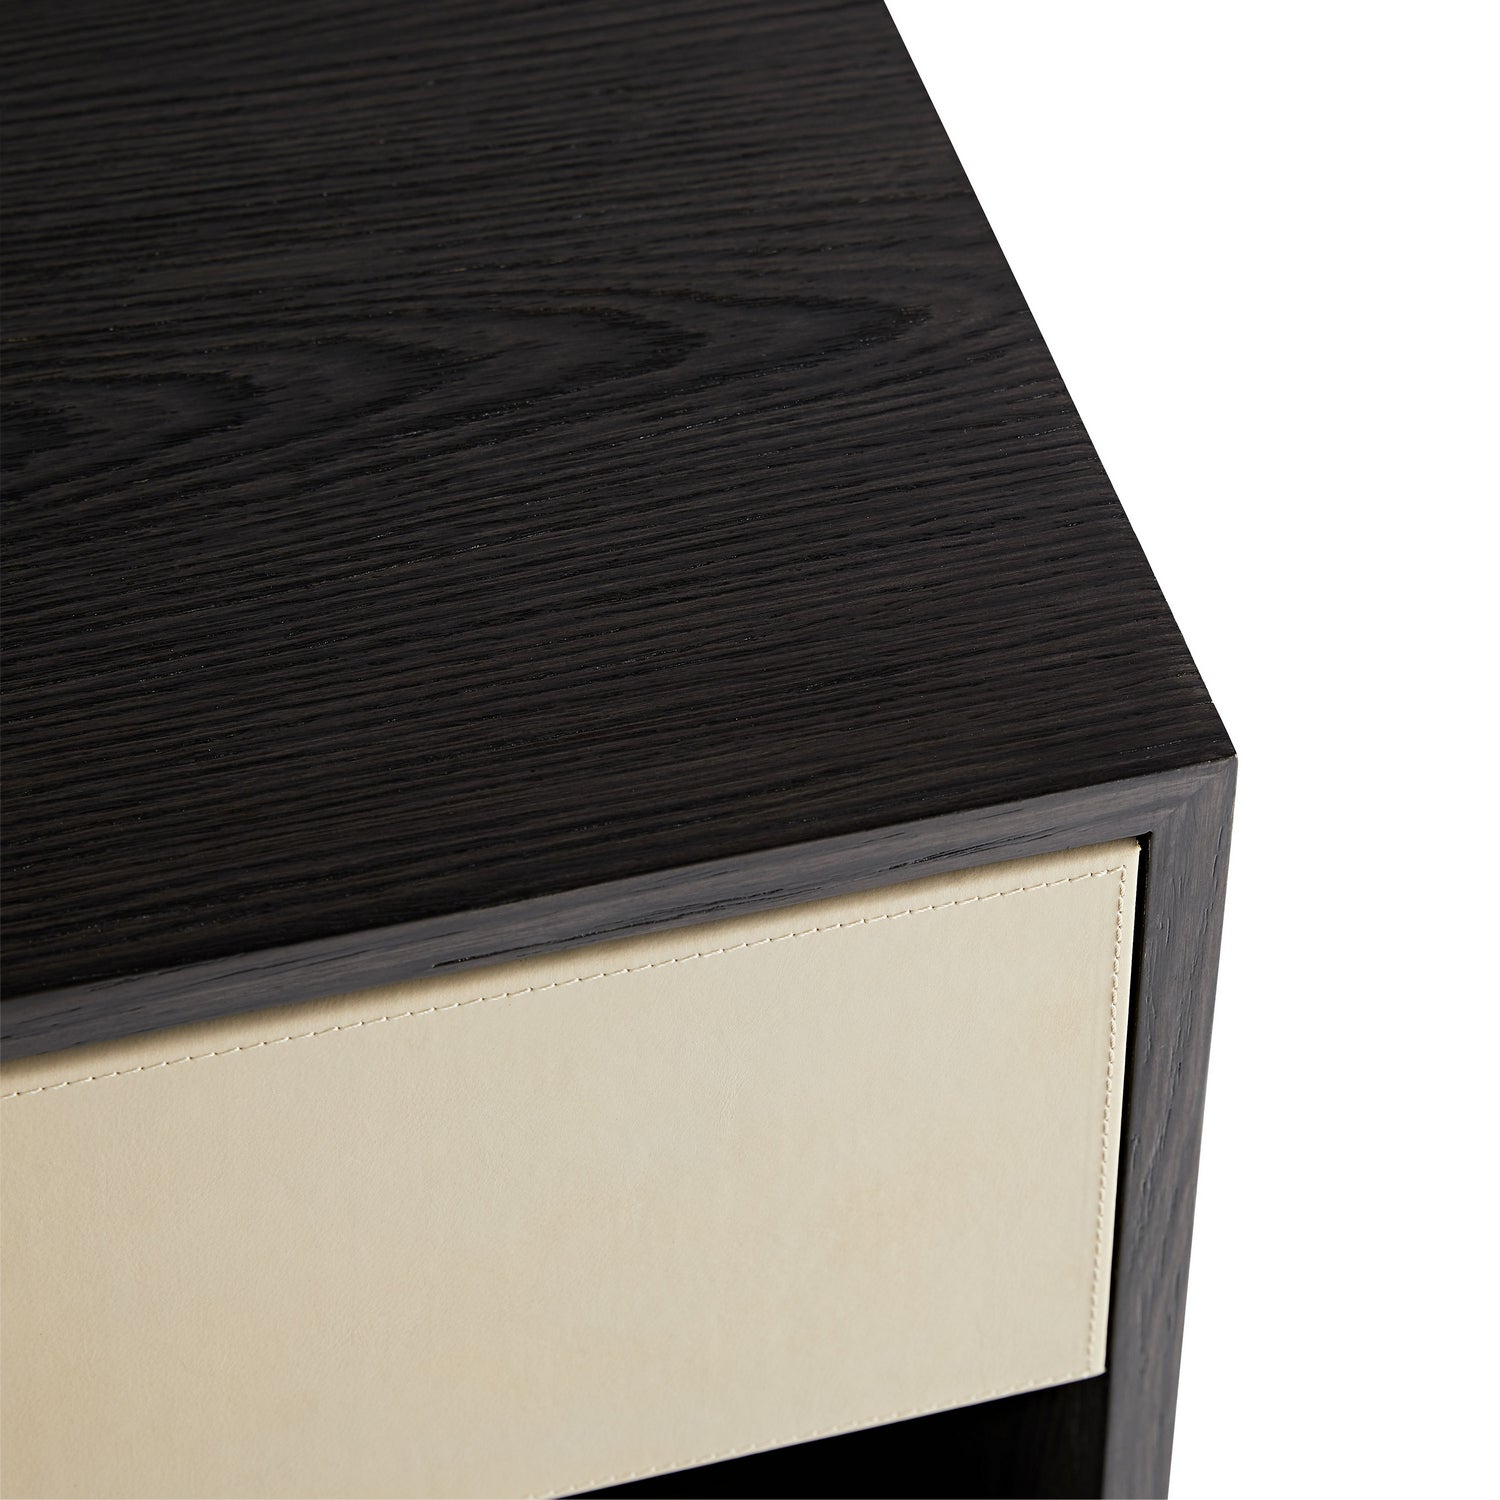 End Table from the Fitz collection in Sable finish